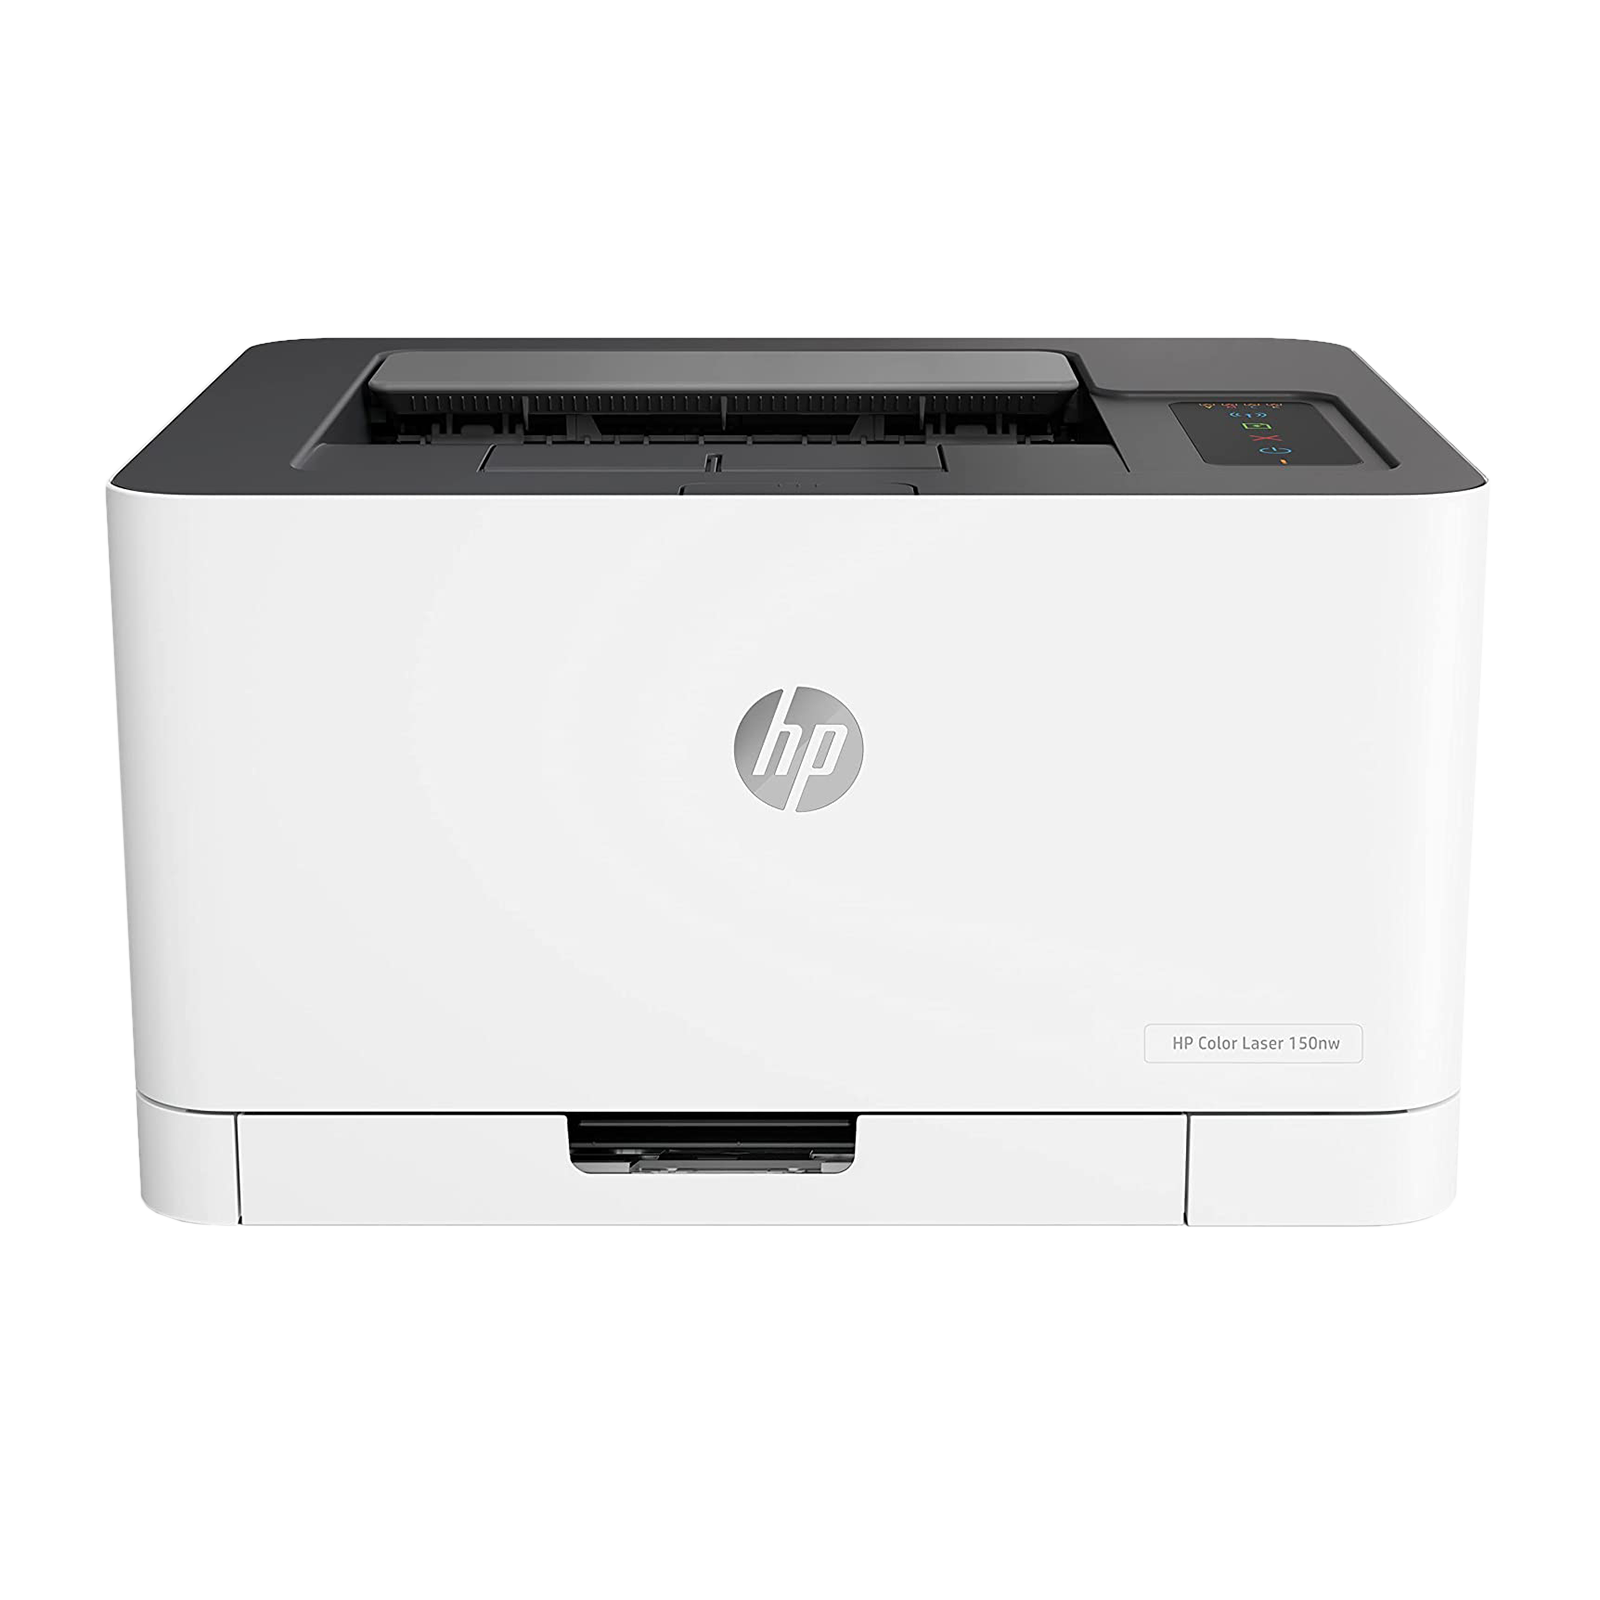 HP Laser 150nw Wireless Color Printer (HP Auto-On/Auto-Off Technology, 4ZB95A, White)_1